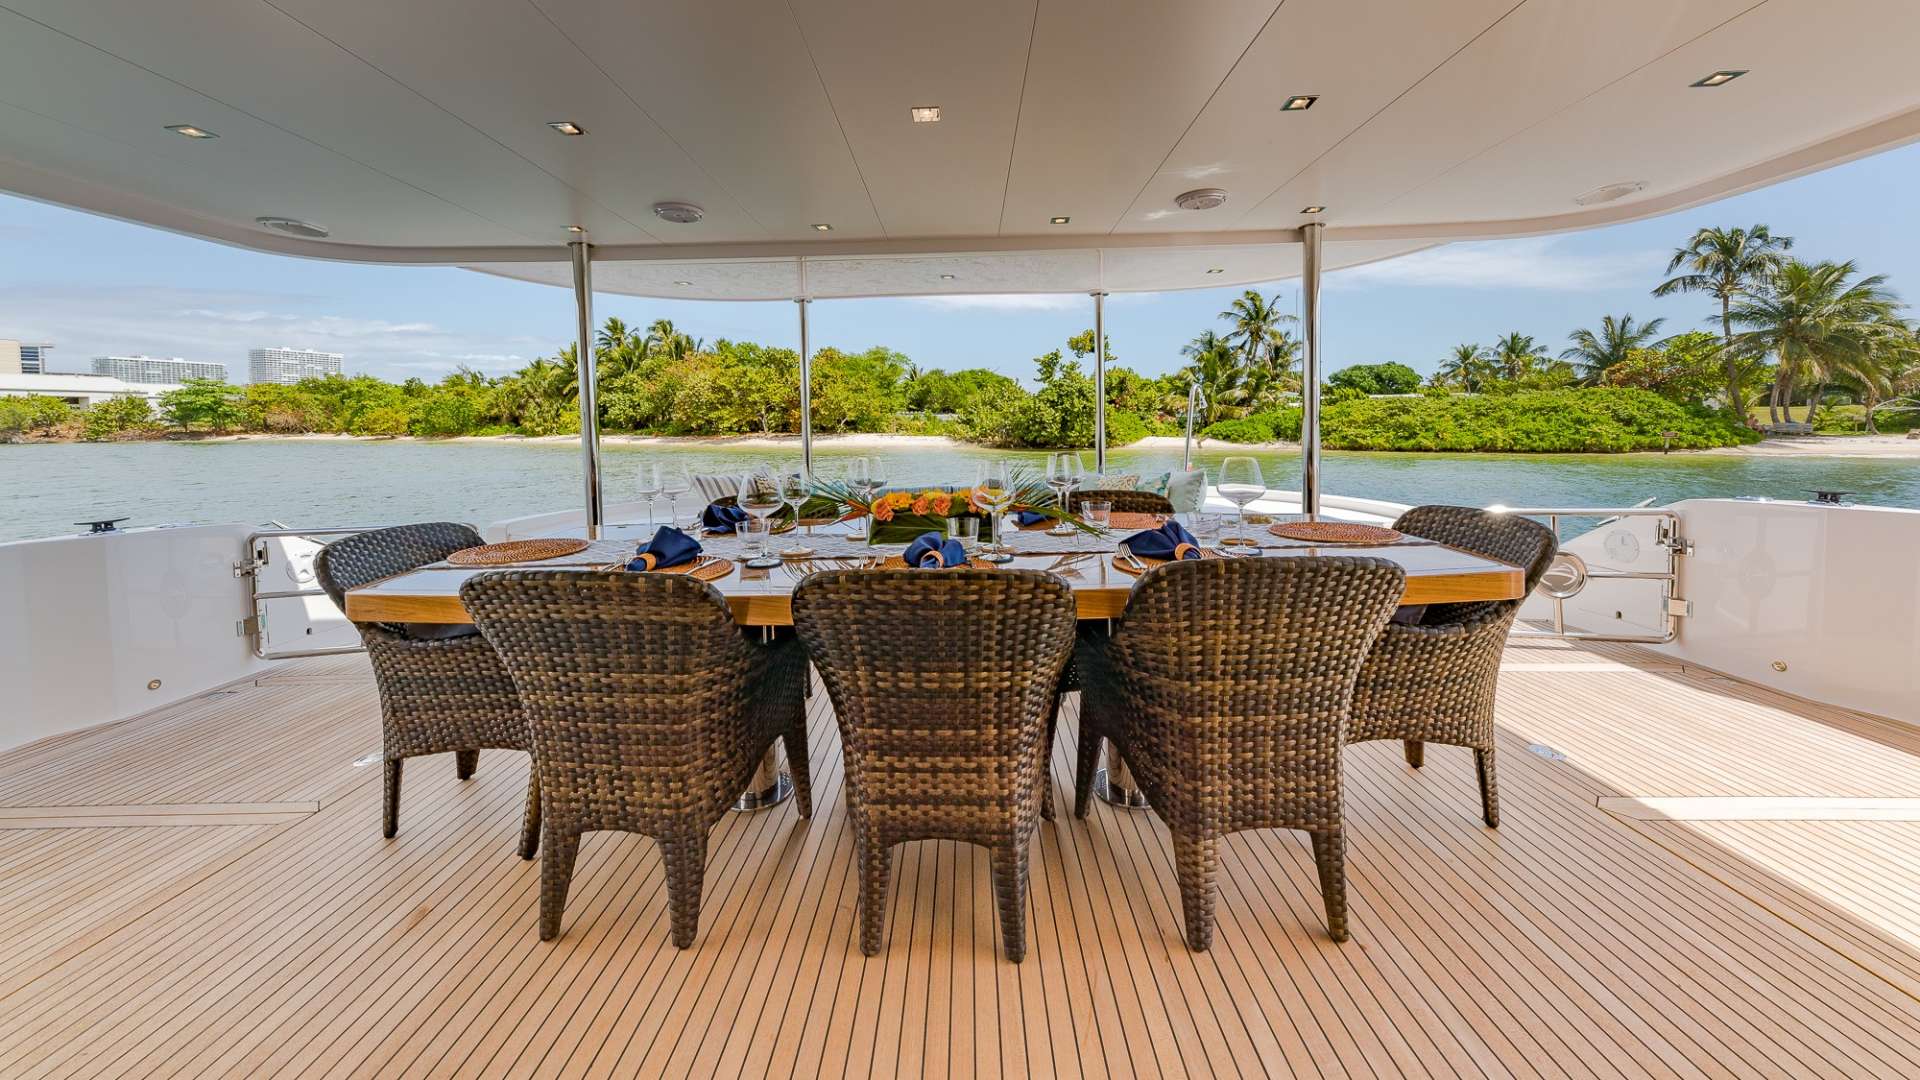 Motor Yacht 'MUCHO GUSTO' Aft Deck Dining Table, 6 PAX, 2 Crew, 65.00 Ft, 19.00 Meters, Built 2019, Horizon